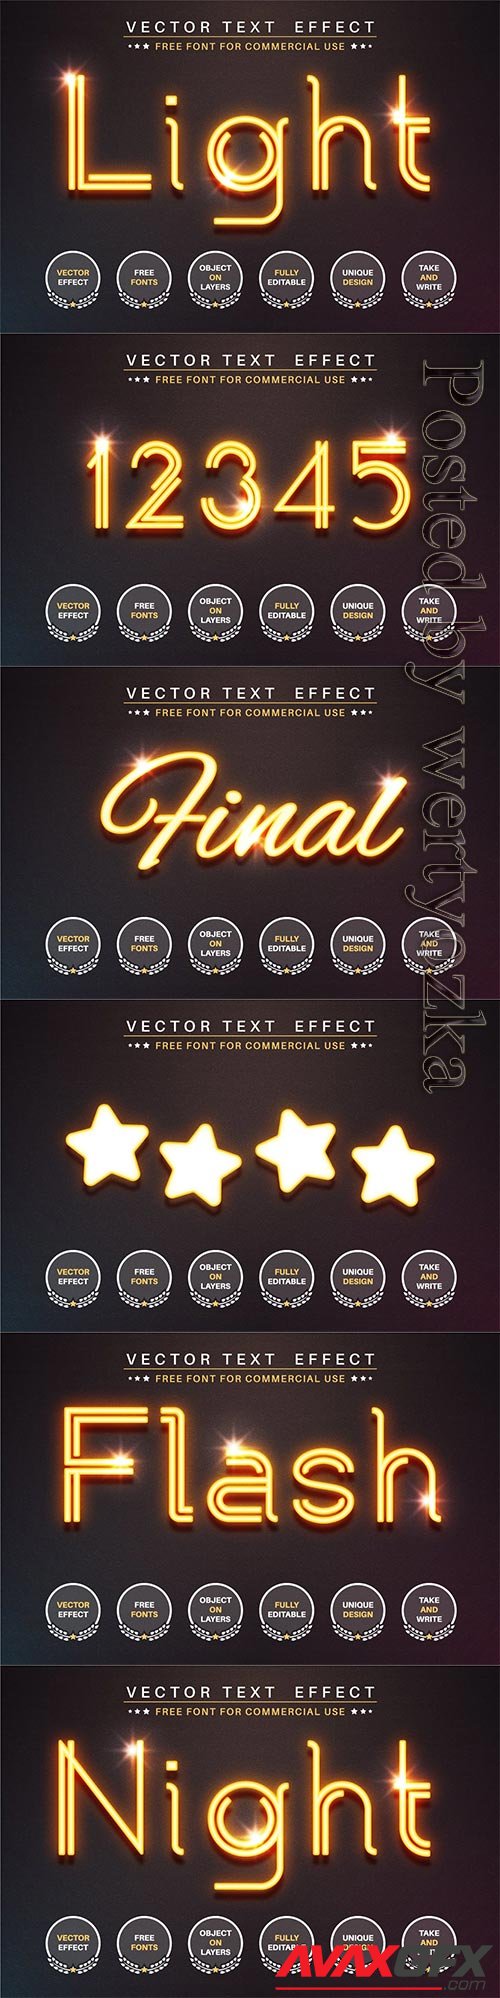 Glowing wire - editable text effect, font style